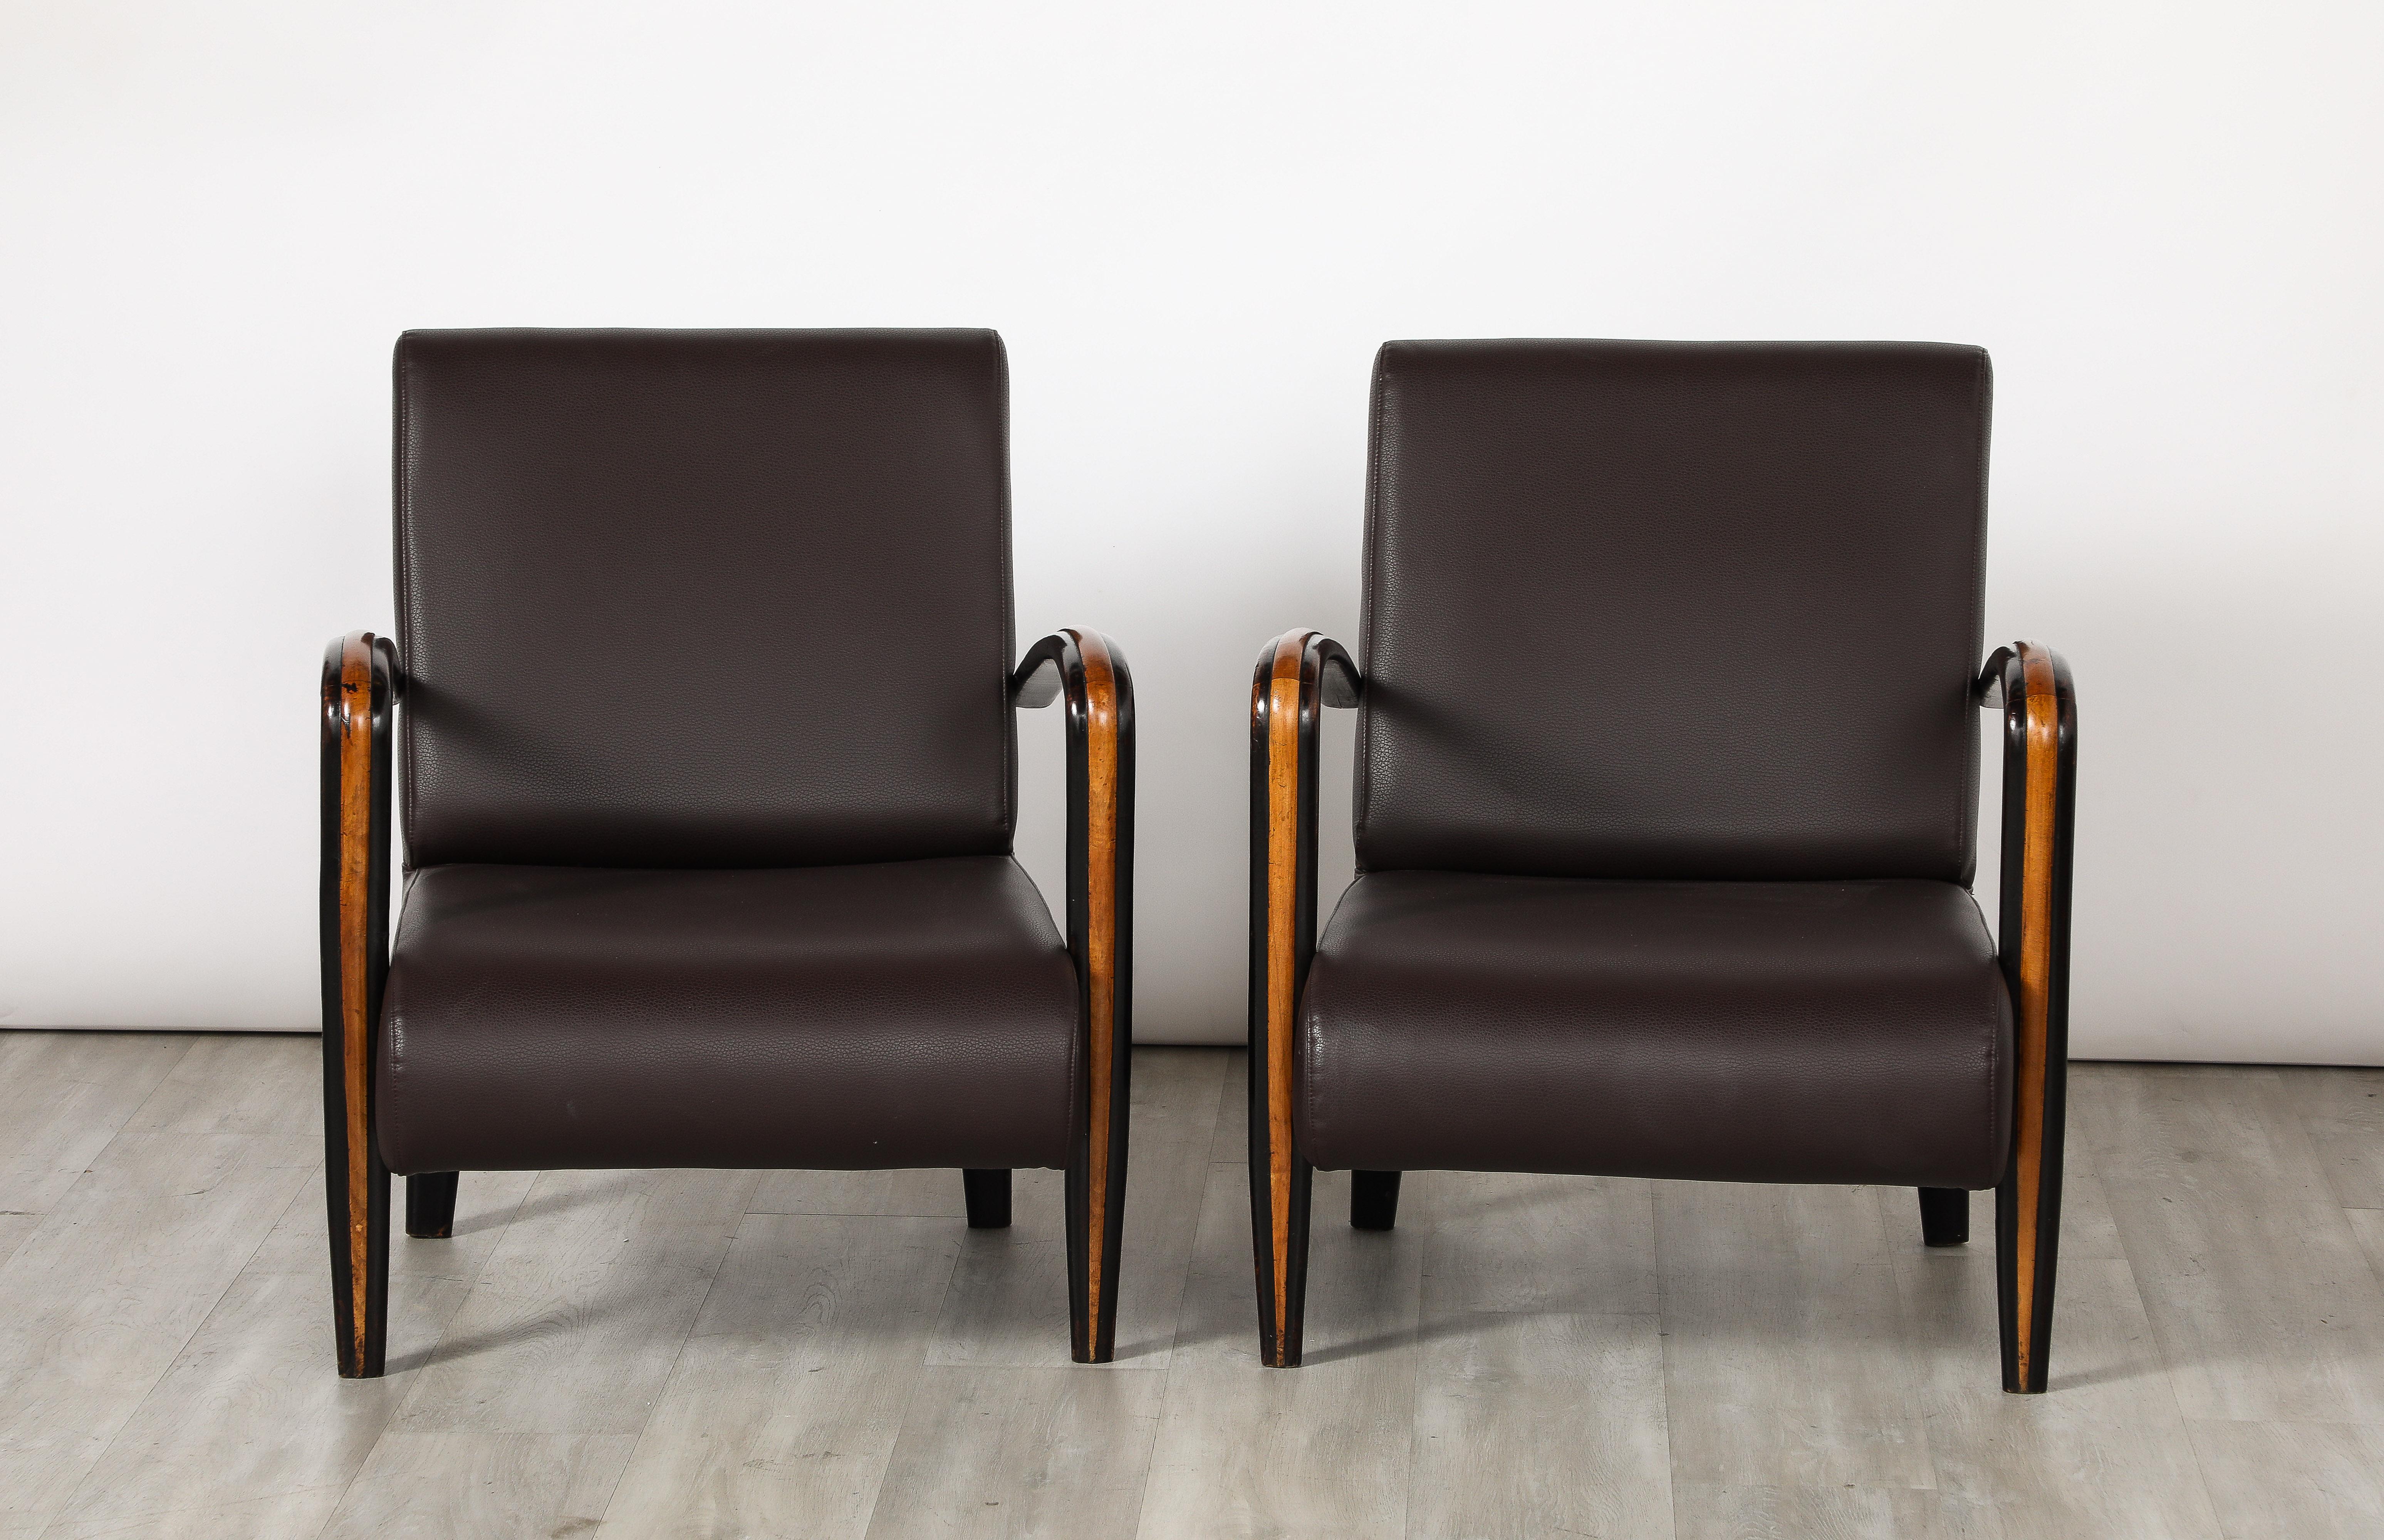 Mid-20th Century Pair of Italian Modernist Lounge Chairs, Italy, circa 1940 For Sale